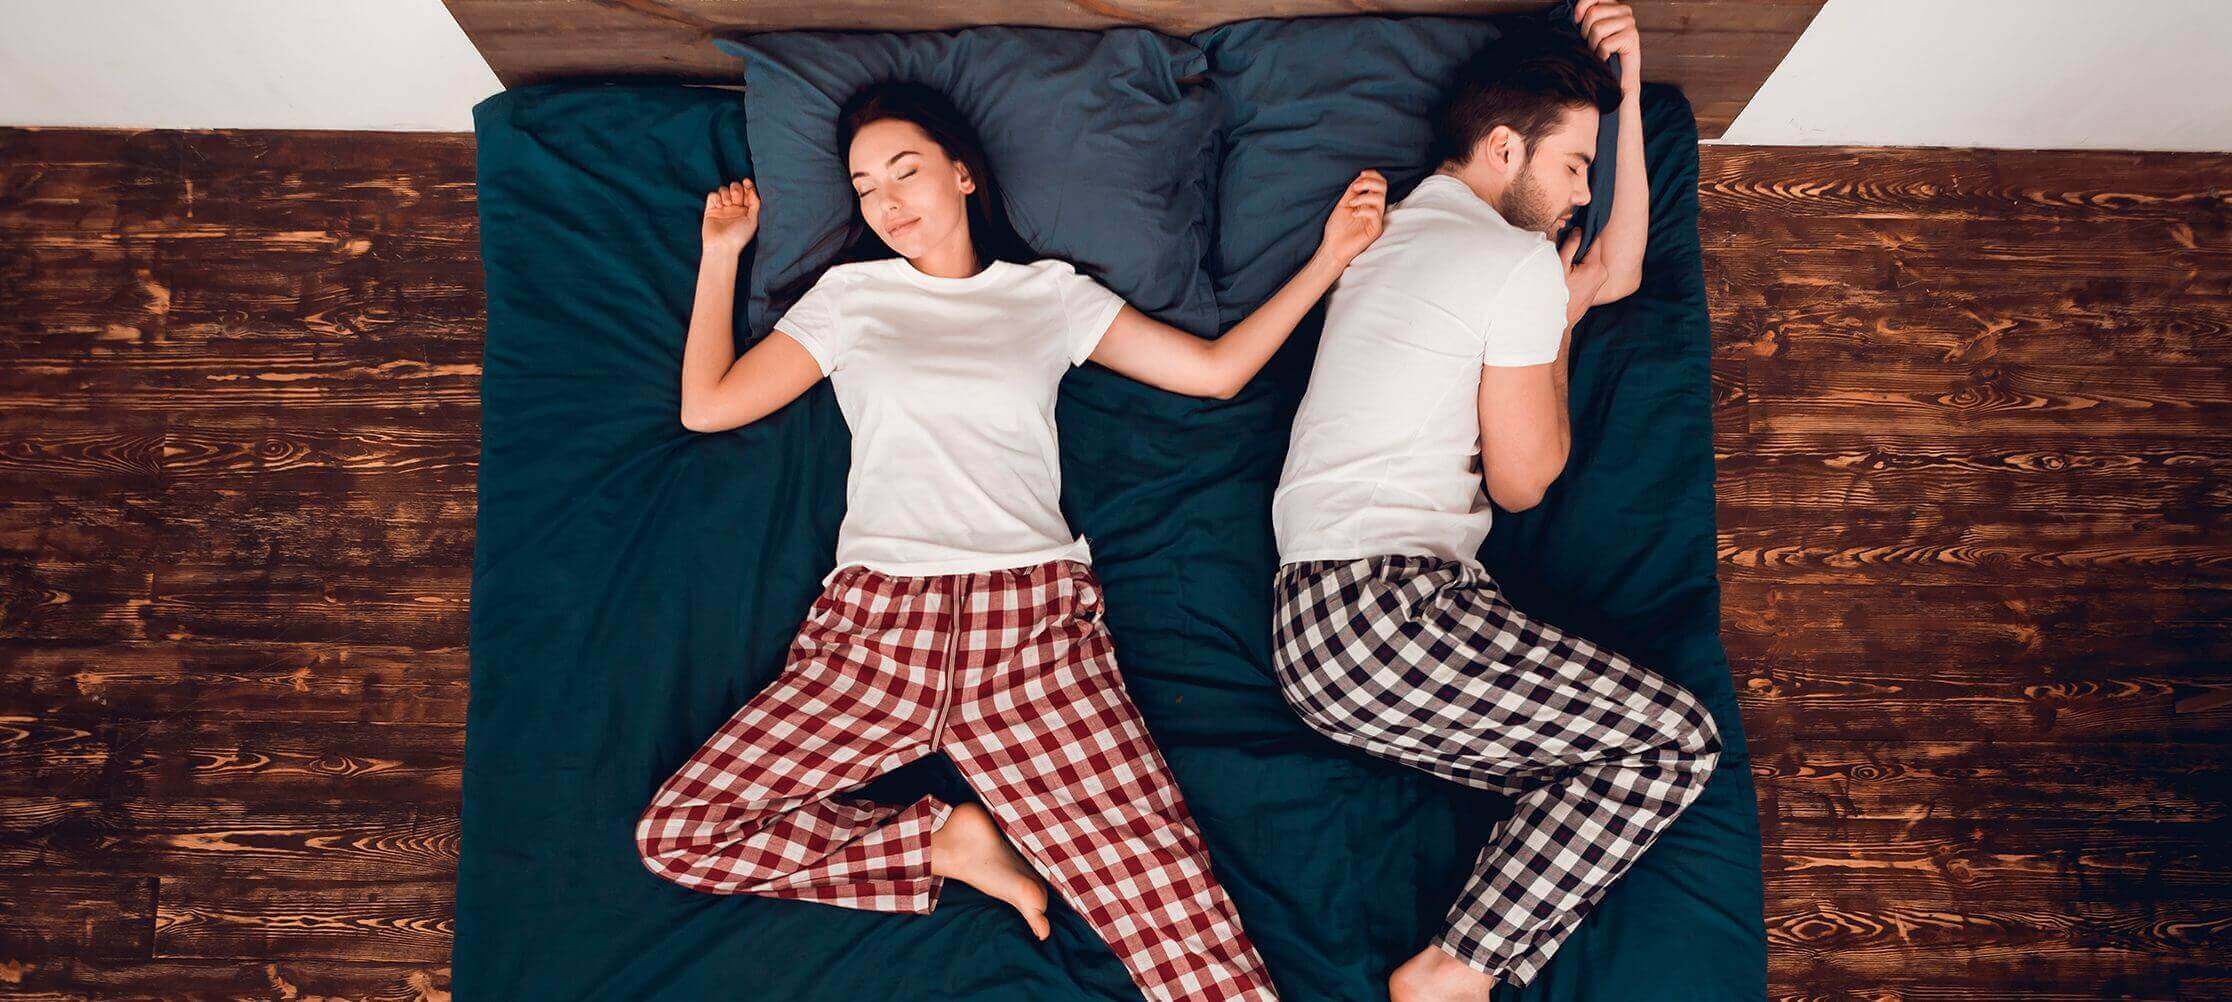 See 12 sleeping positions that will be better for you as a Couple |  JamiiForums